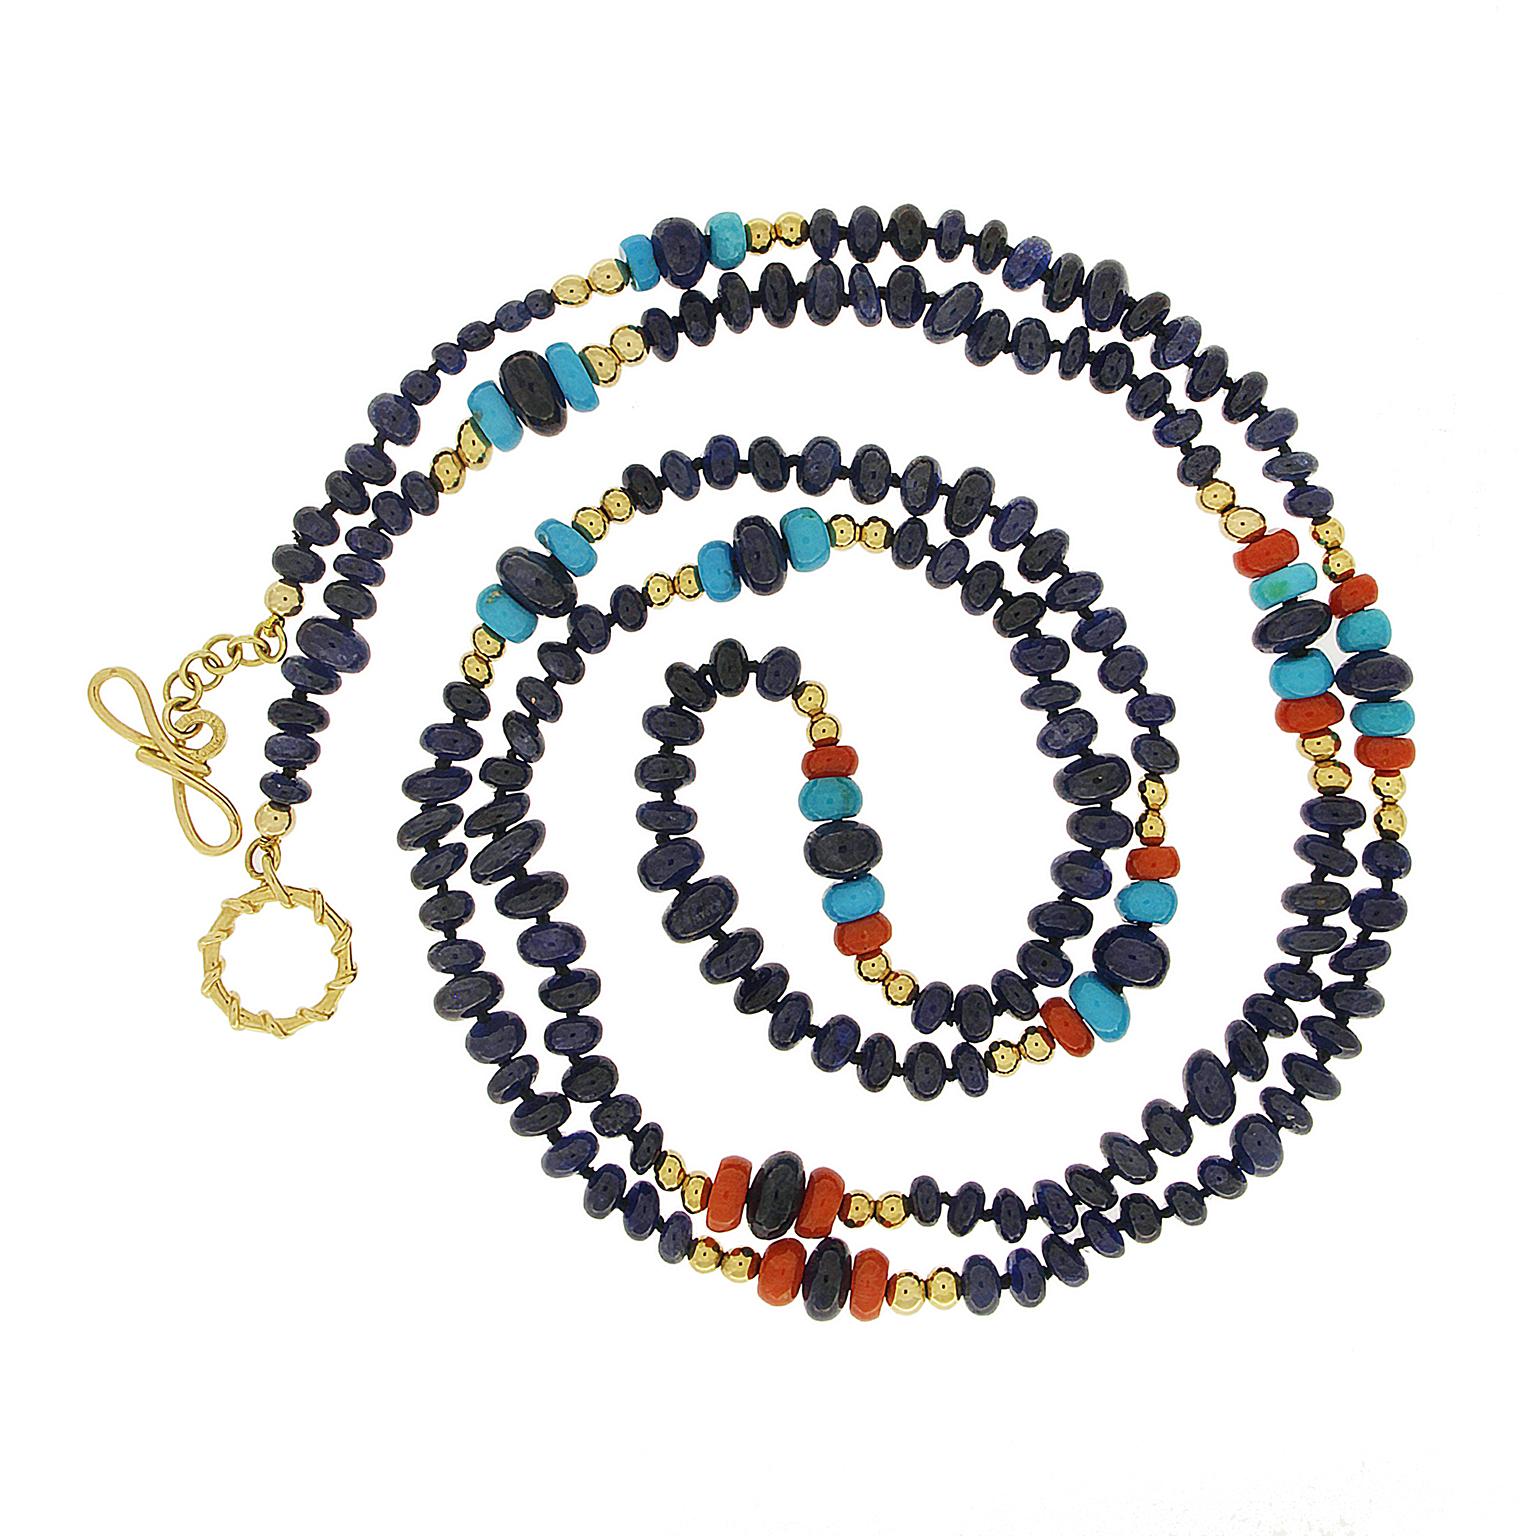 A vivid array of gems circulate throughout this necklace. Sapphires are the focus with additional beads of red coral and Sleeping Beauty turquoise as complements. 18k yellow gold beads combine with the gemstones in different designs for captivating